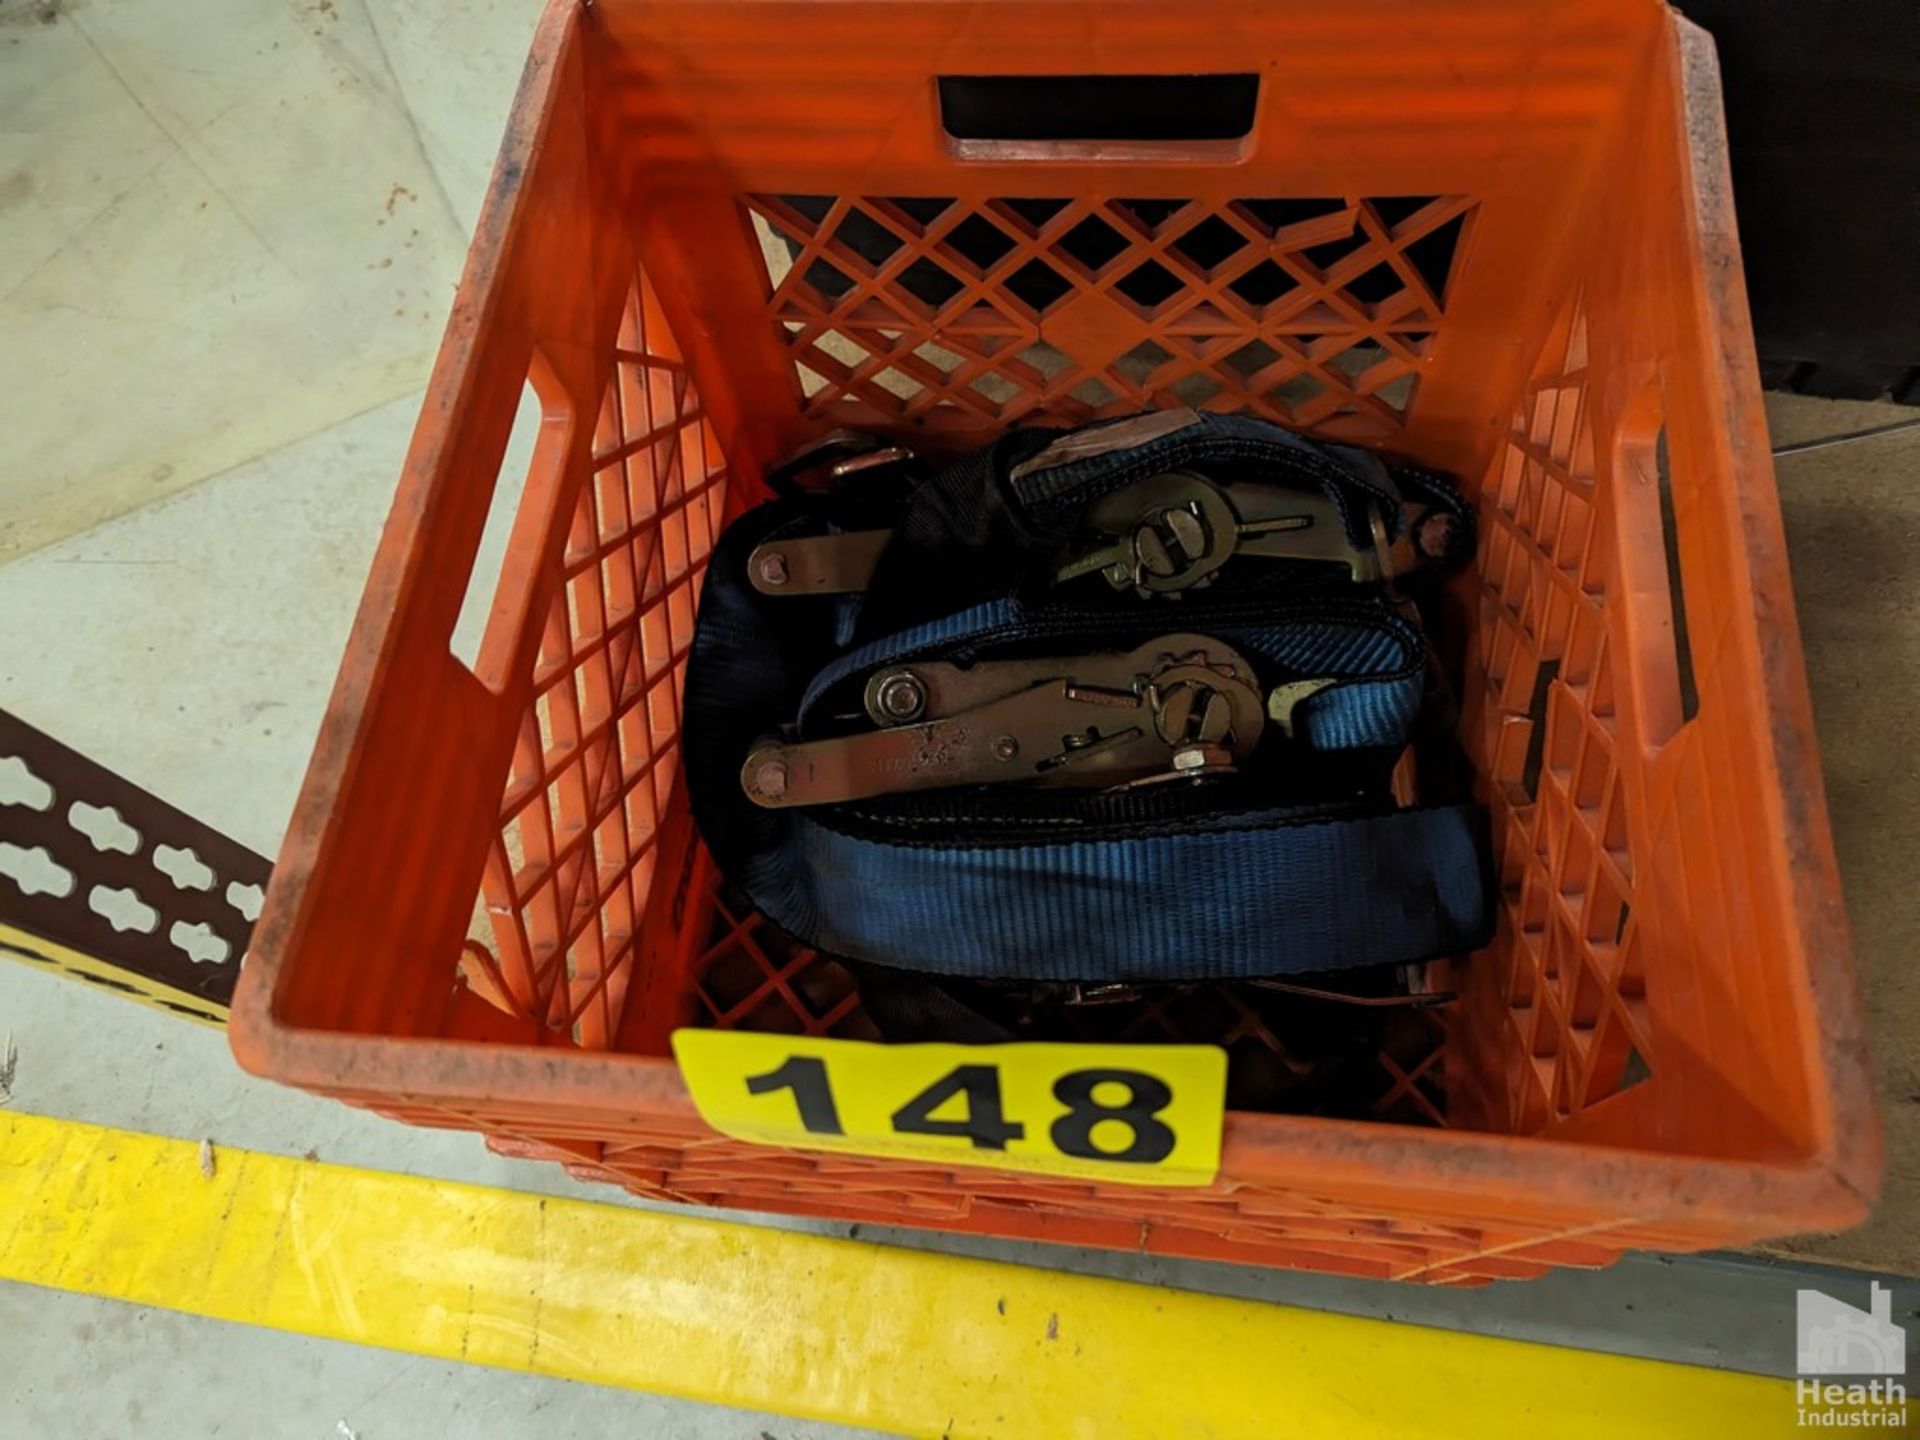 LARGE RATCHET TIE DOWN IN CRATE